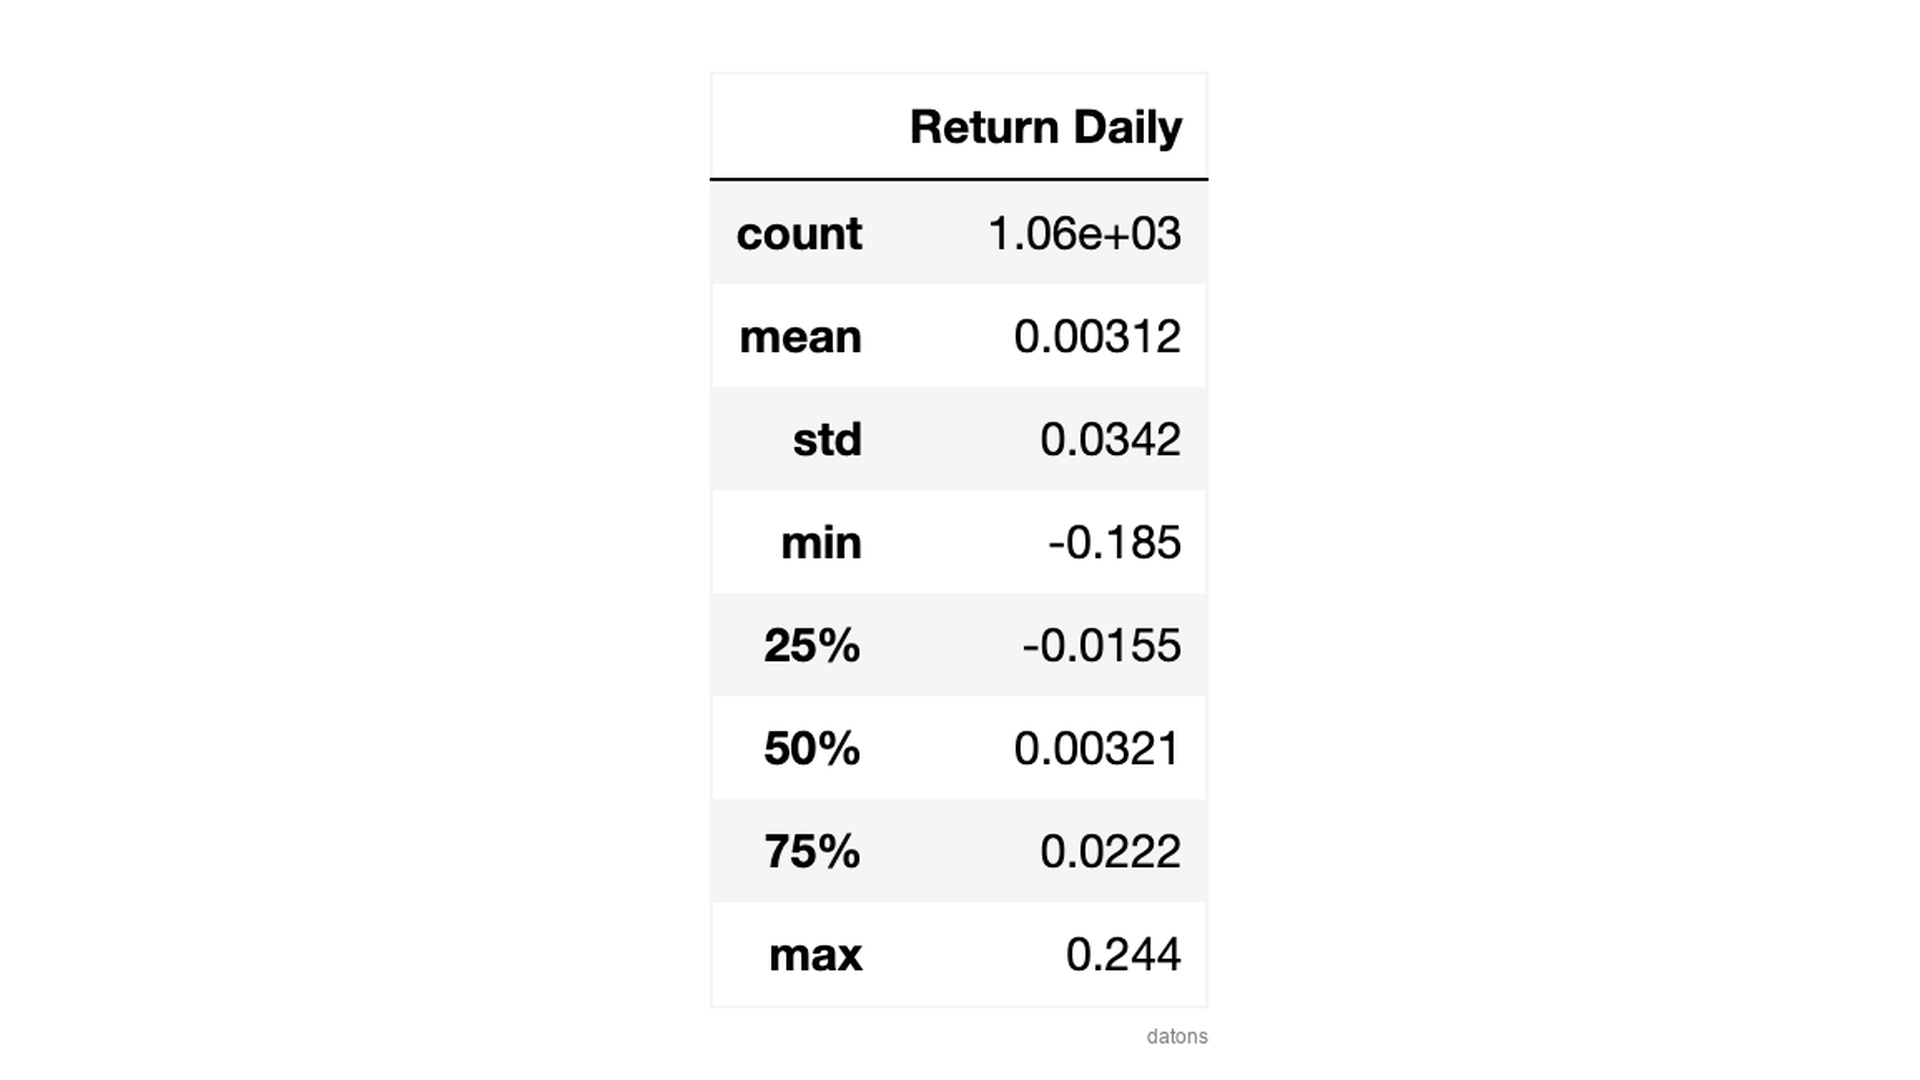 Descriptive statistics of the daily return of NVIDIA, including mean, standard deviation, and percentiles, to analyze the distribution of returns.